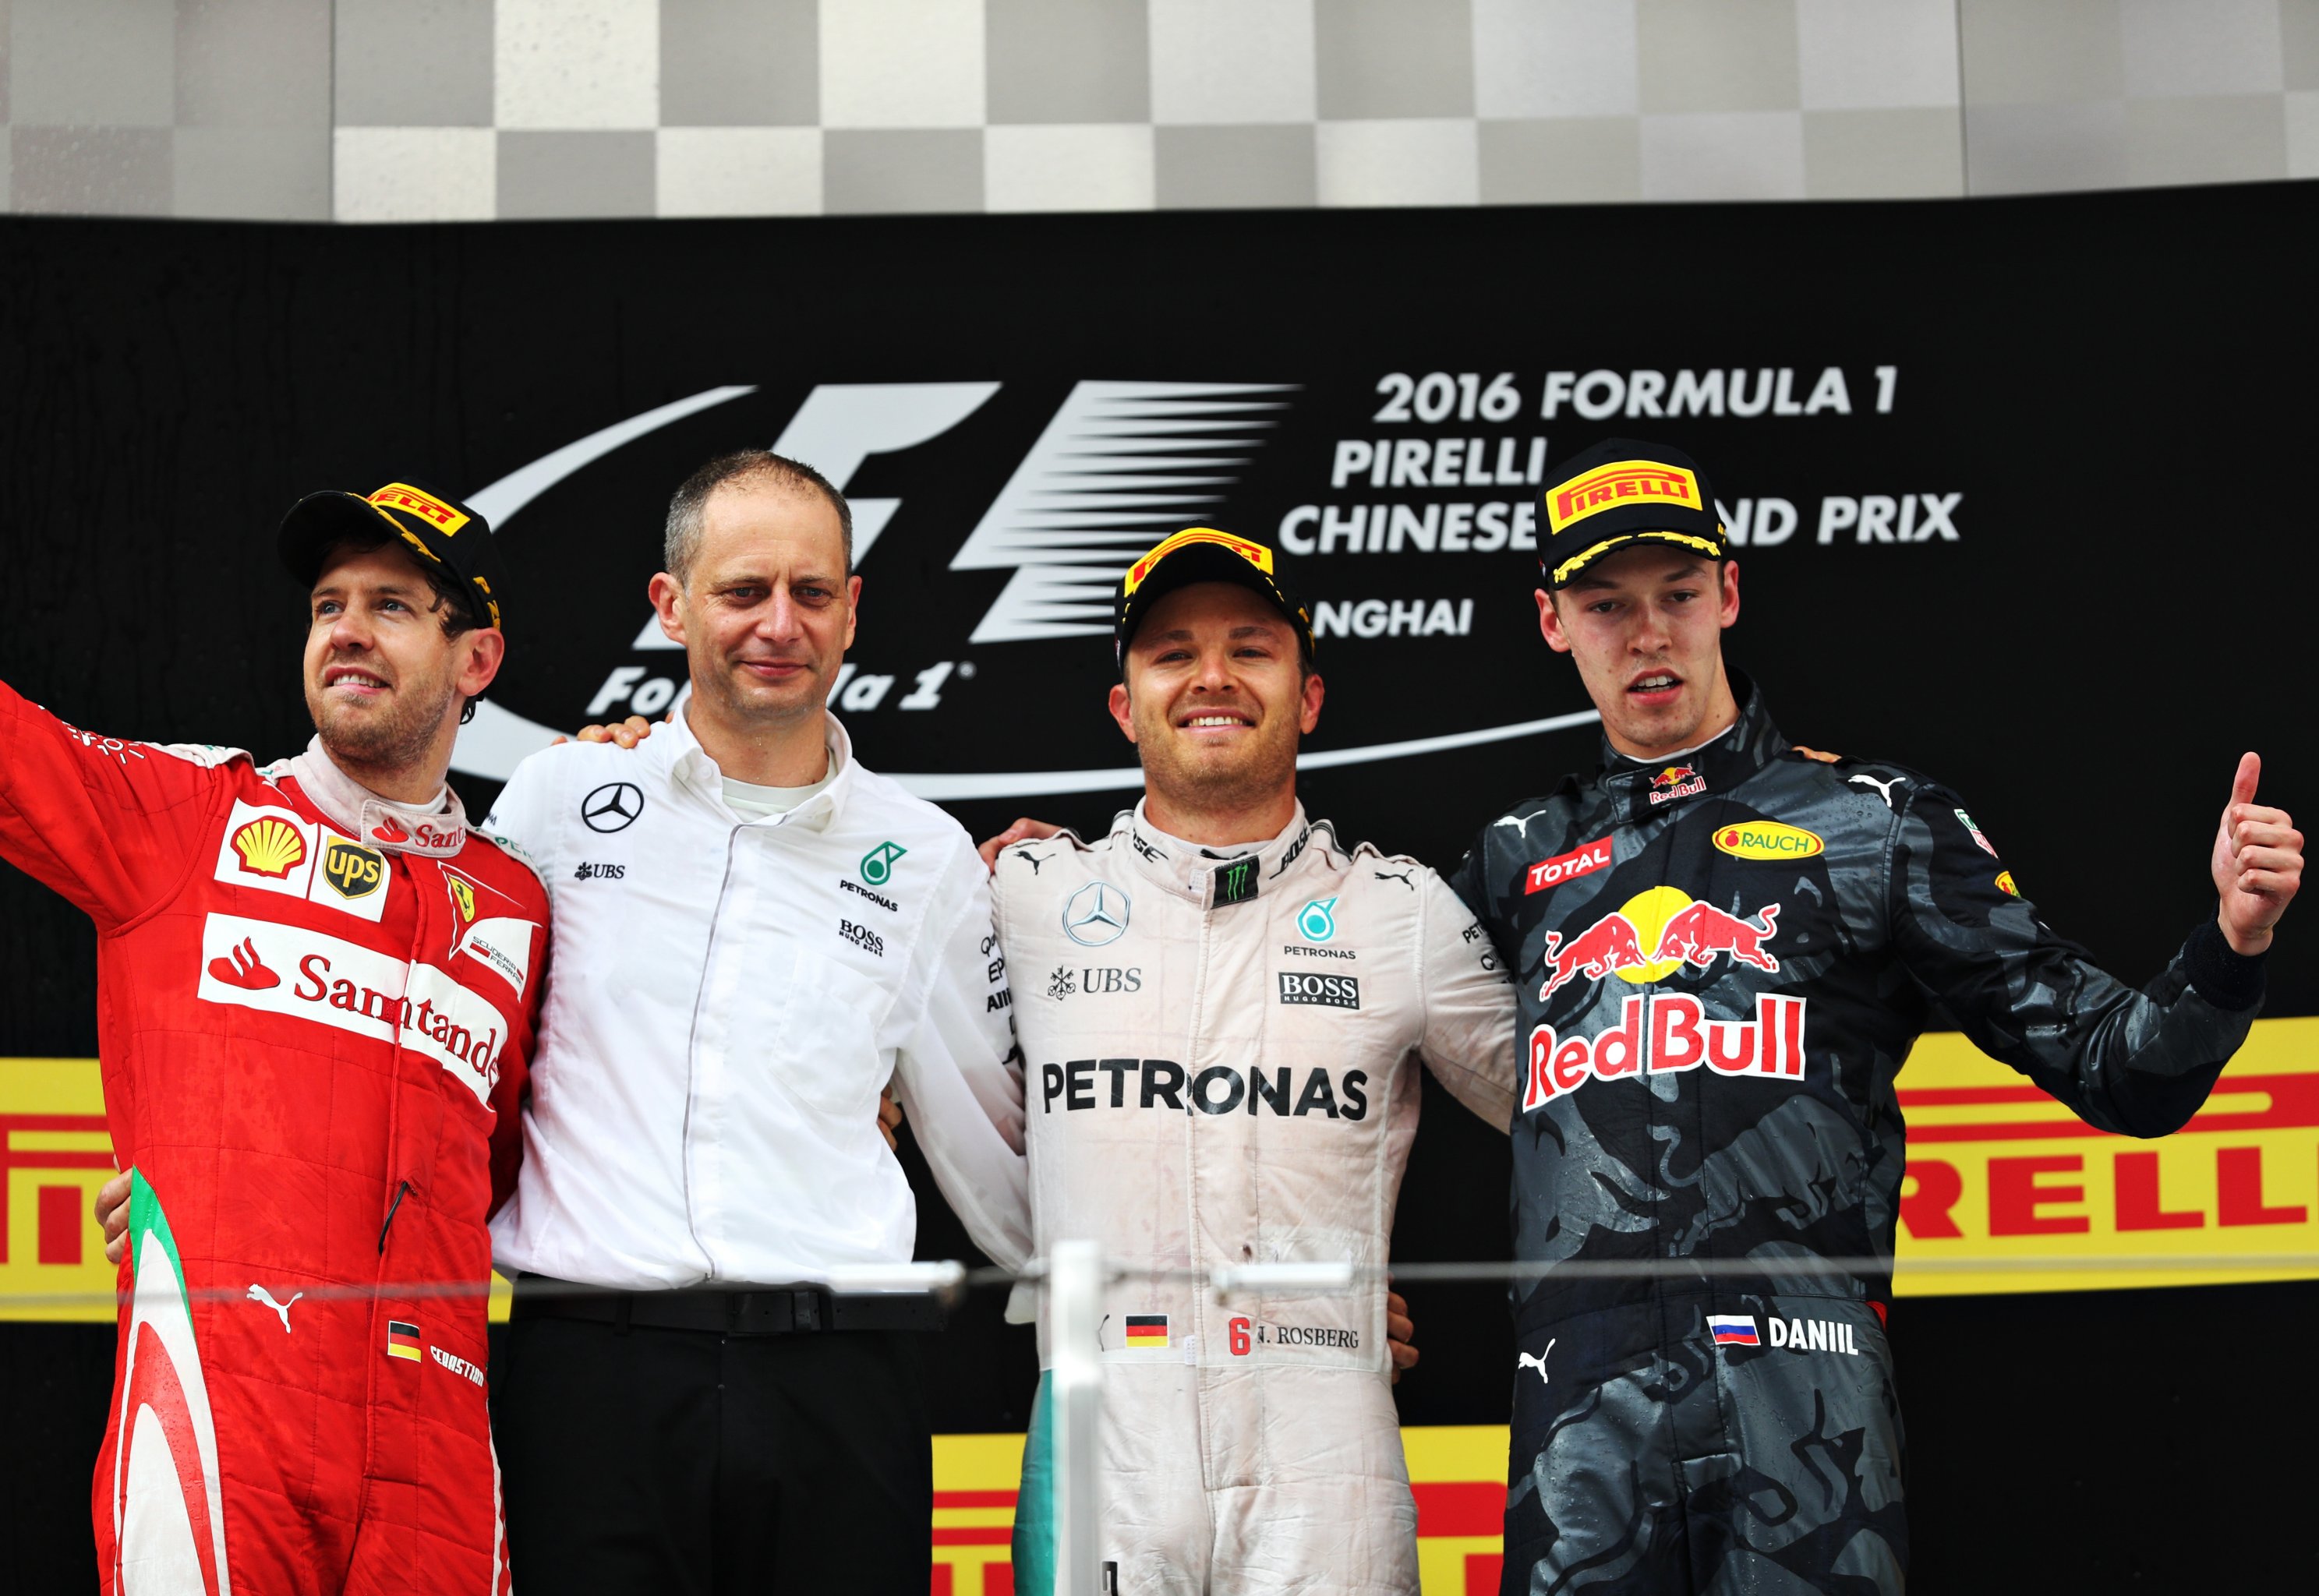 Chinese Grand Prix 2016: Winners and Losers from Shanghai Race